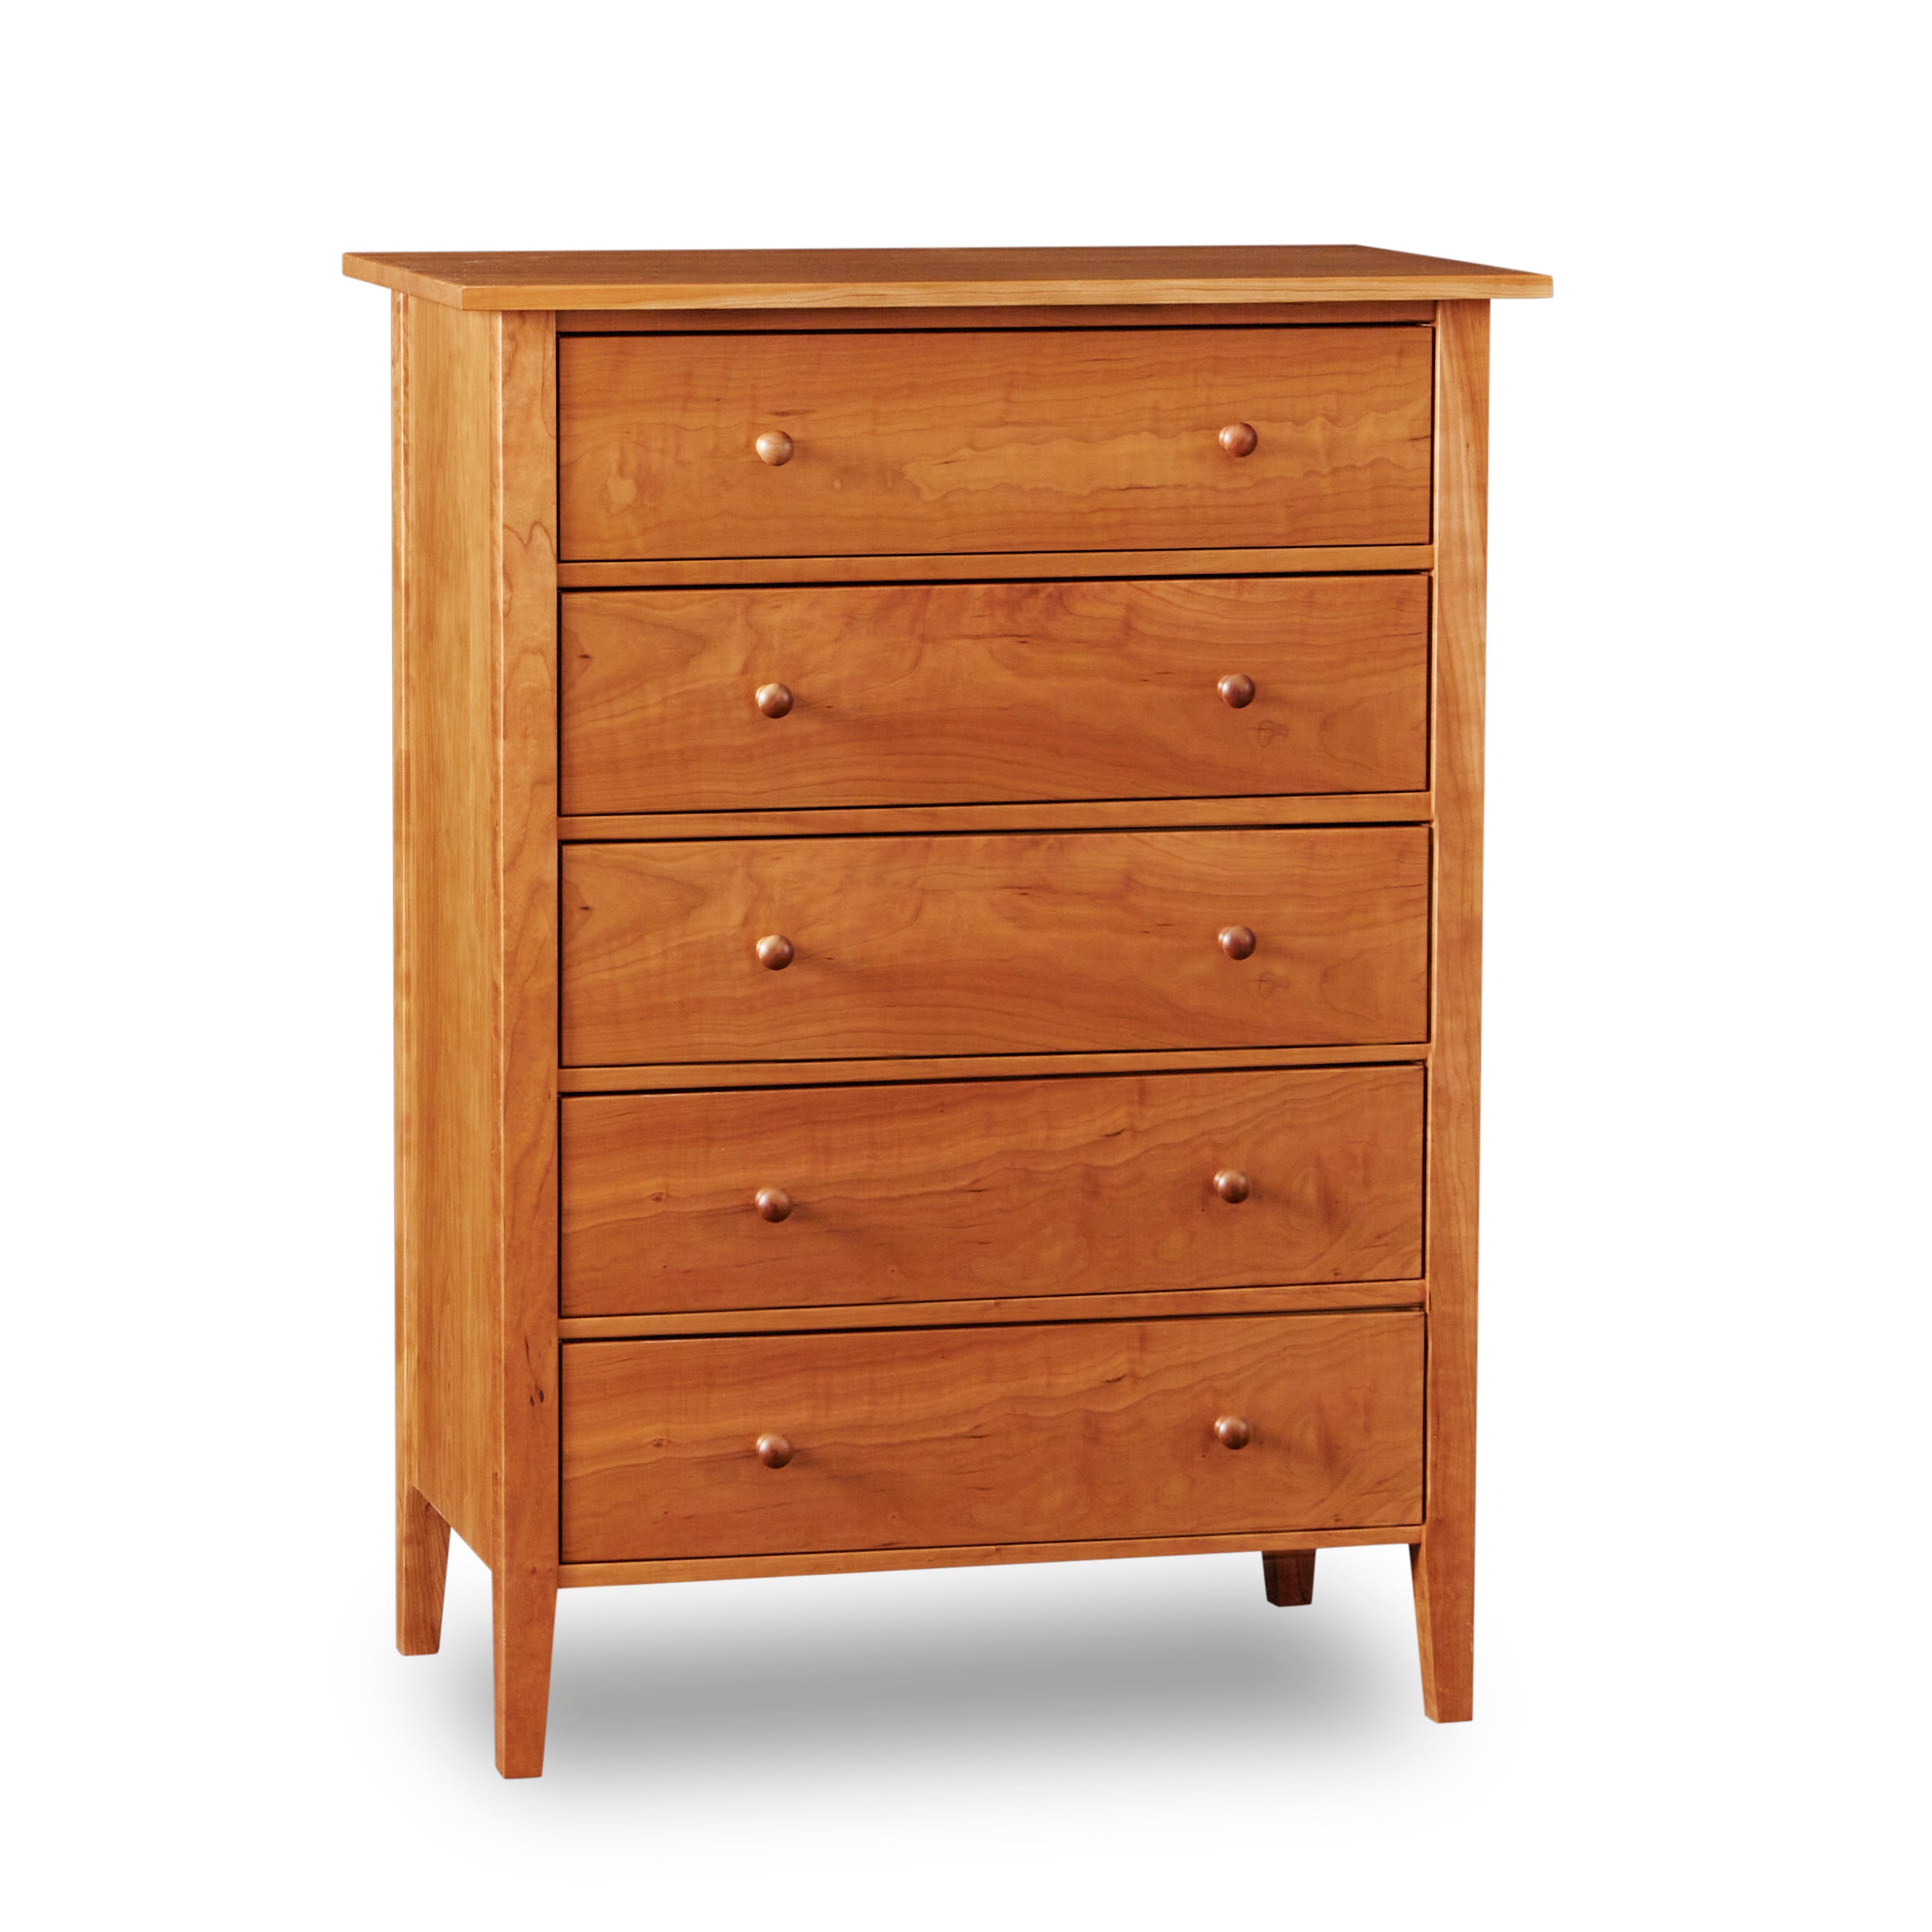 Modern interpretation of a classic Shaker style chest with five drawers in solid cherry wood